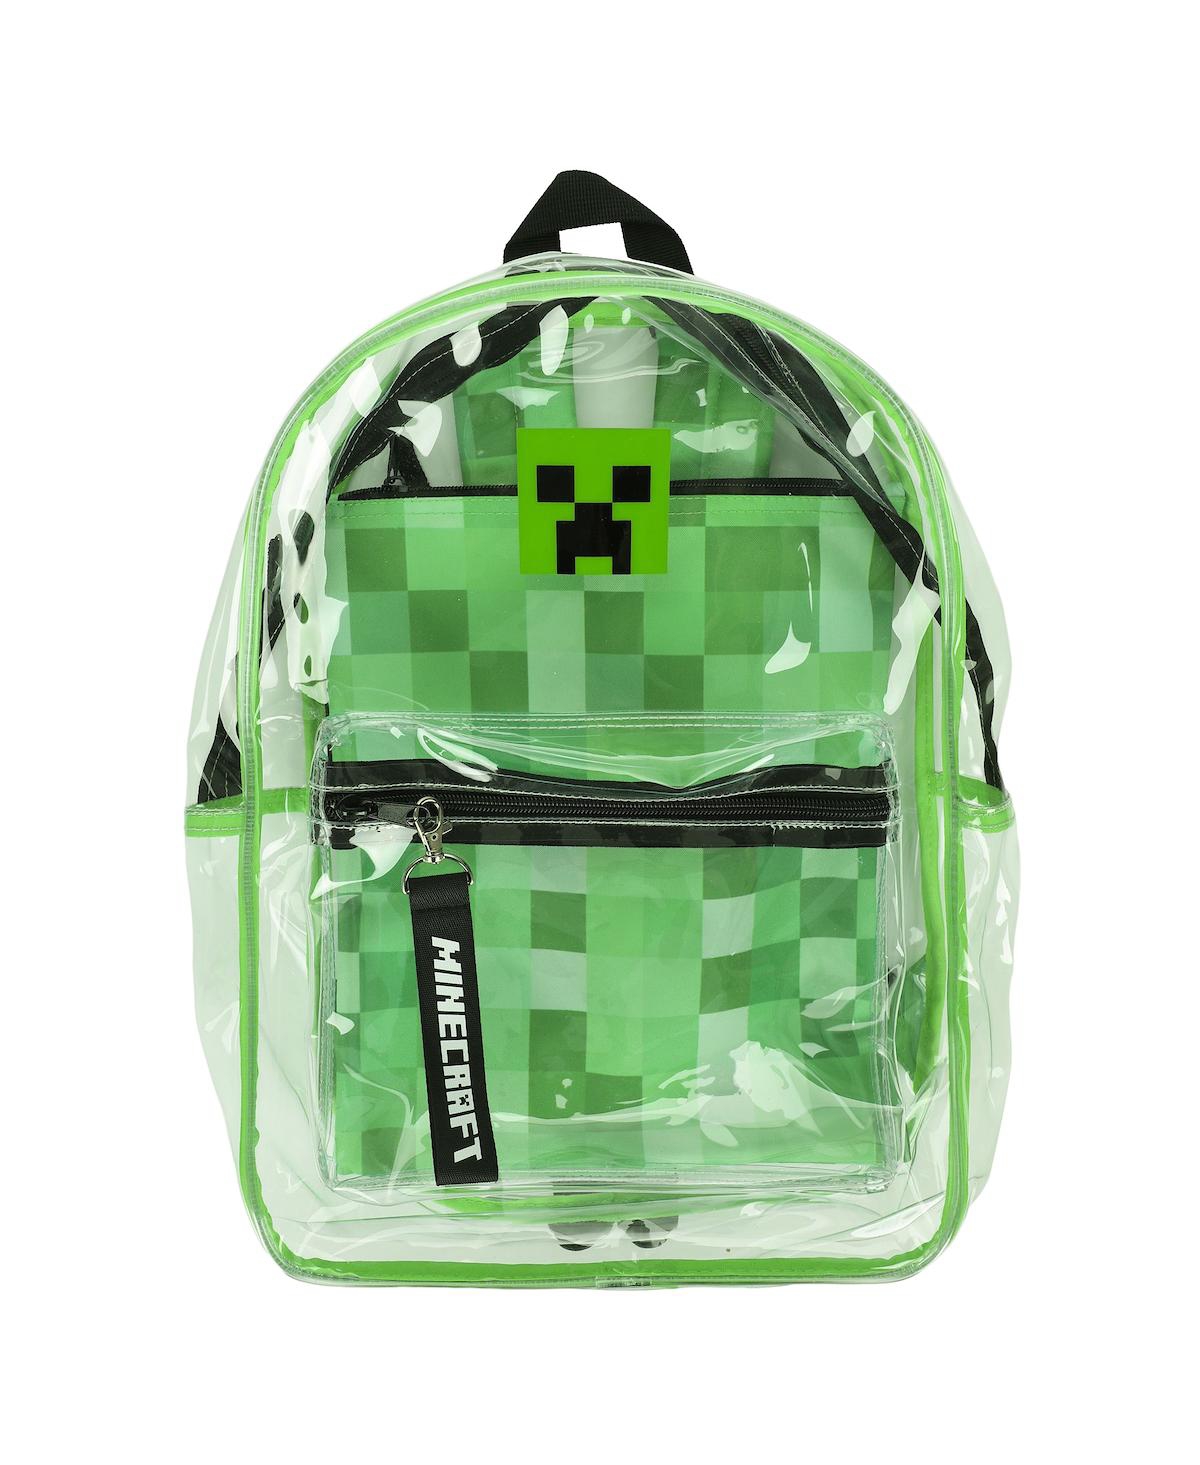 17" Clear Plastic Backpack with Removable Laptop Pocket - Green